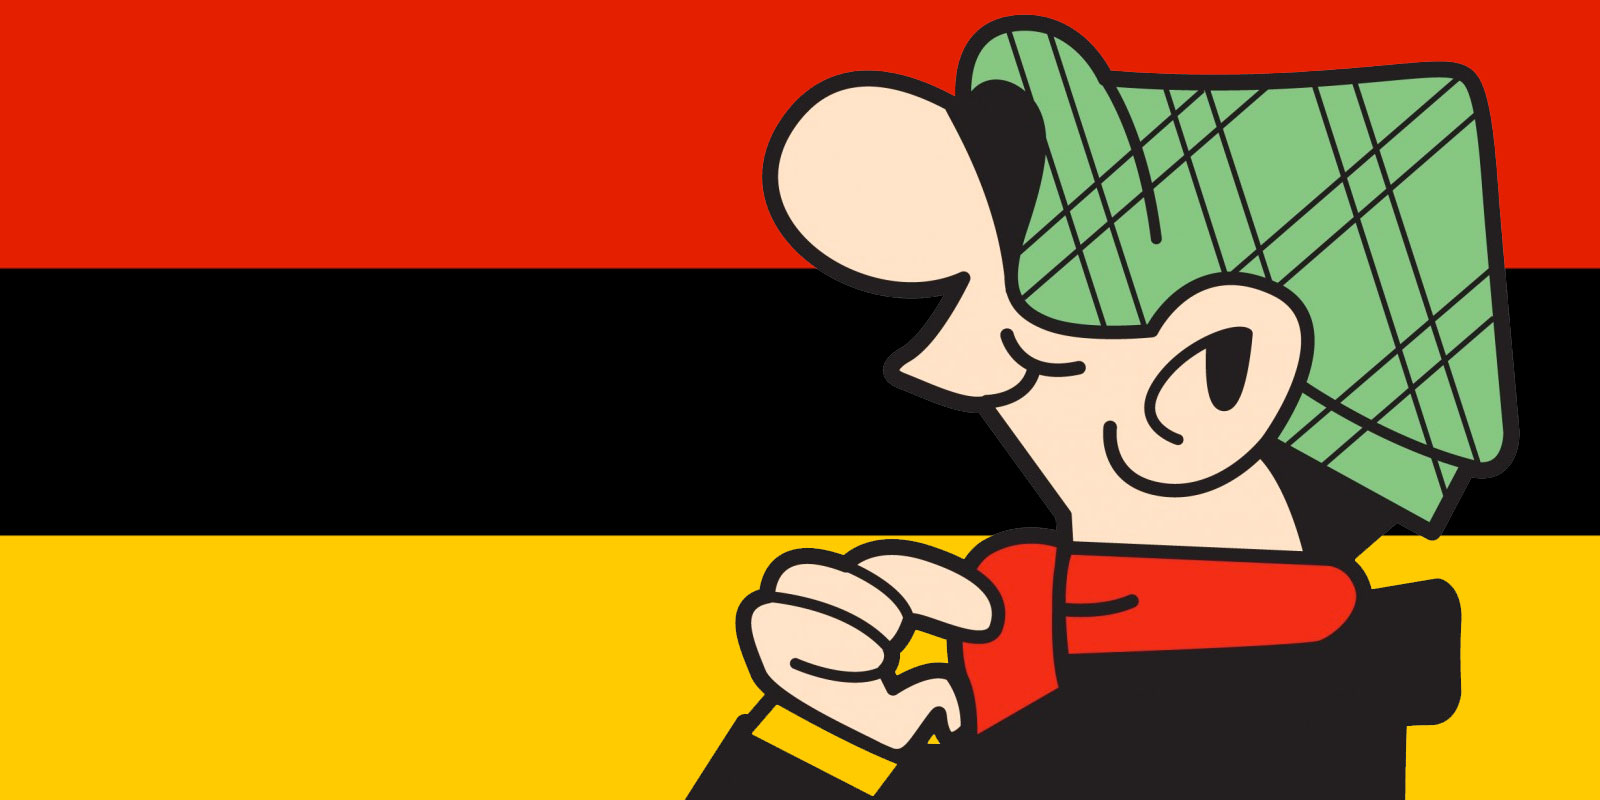 In Germany the comic book character Andy Capp has a VERY rude name The Poke